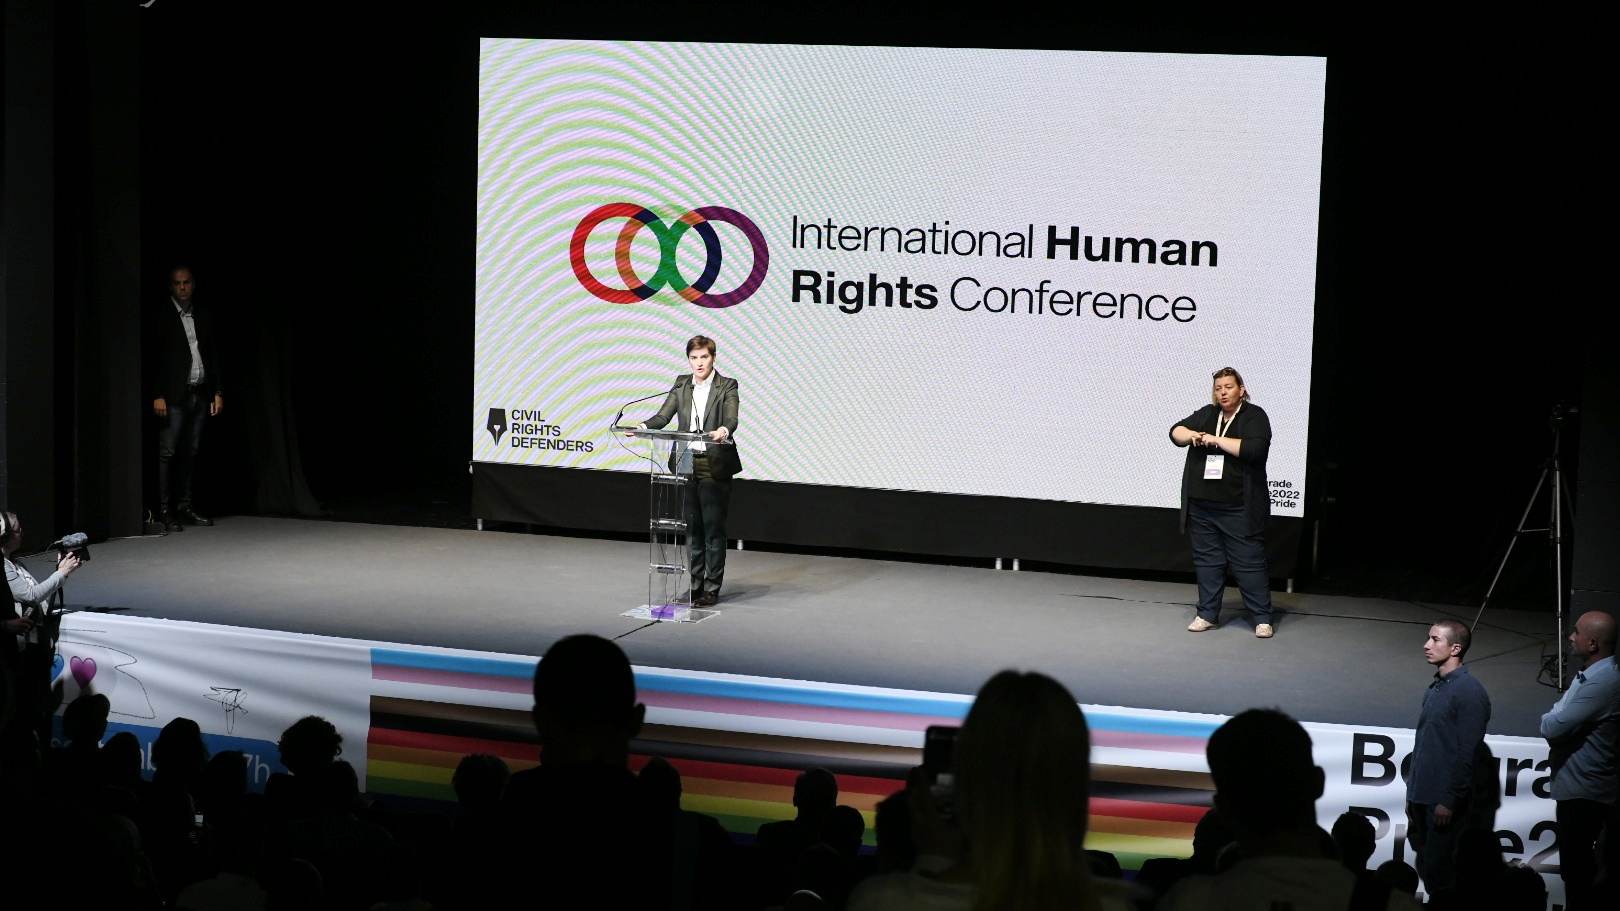 The European Union and the Council of Europe supported an International Human Rights Conference in Serbia marking the 2022 EuroPride, which hosted more than 500 participants